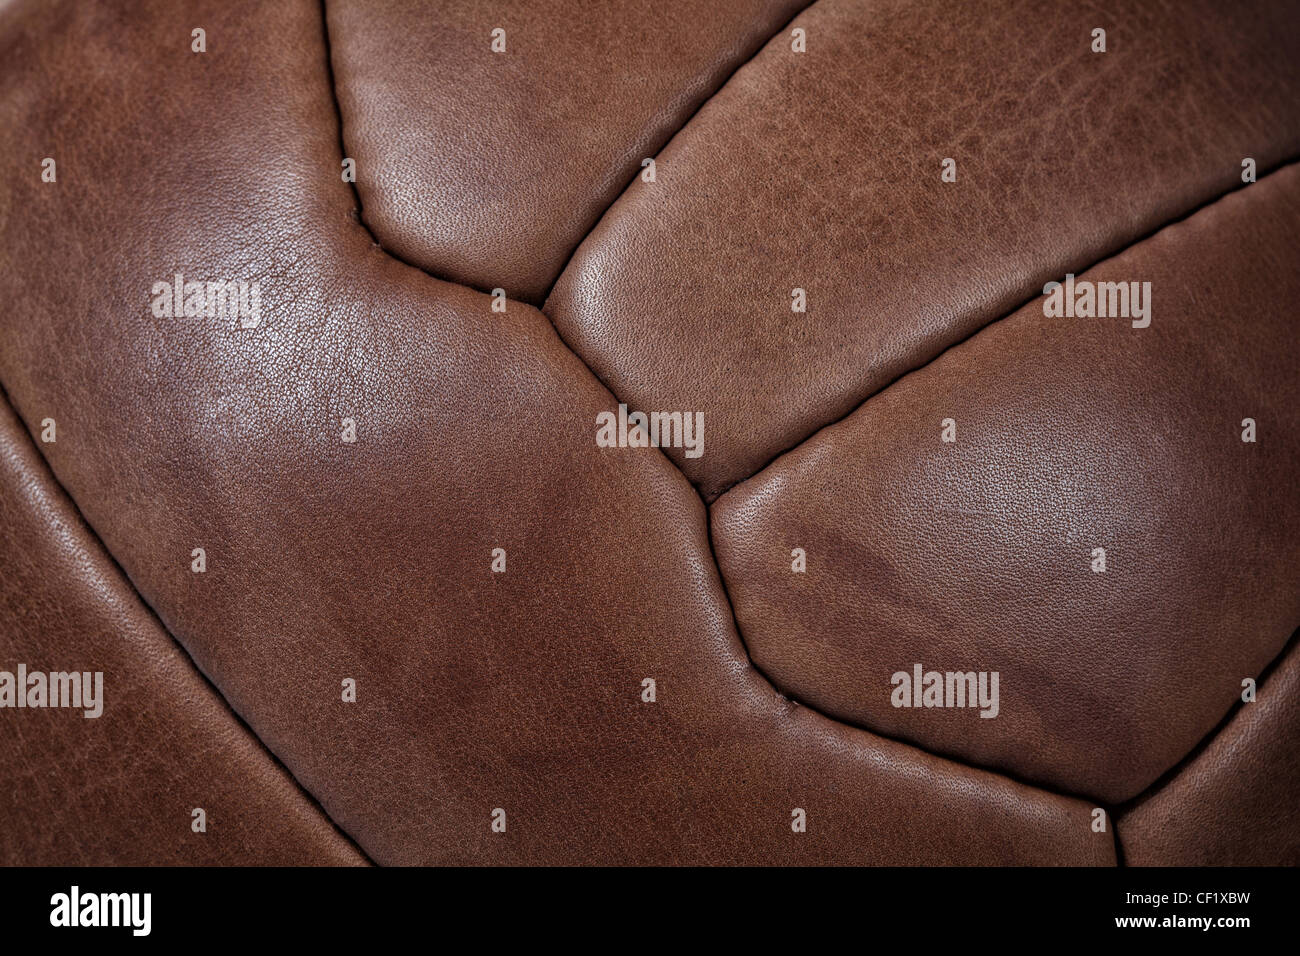 detail of leather soccer ball Stock Photo